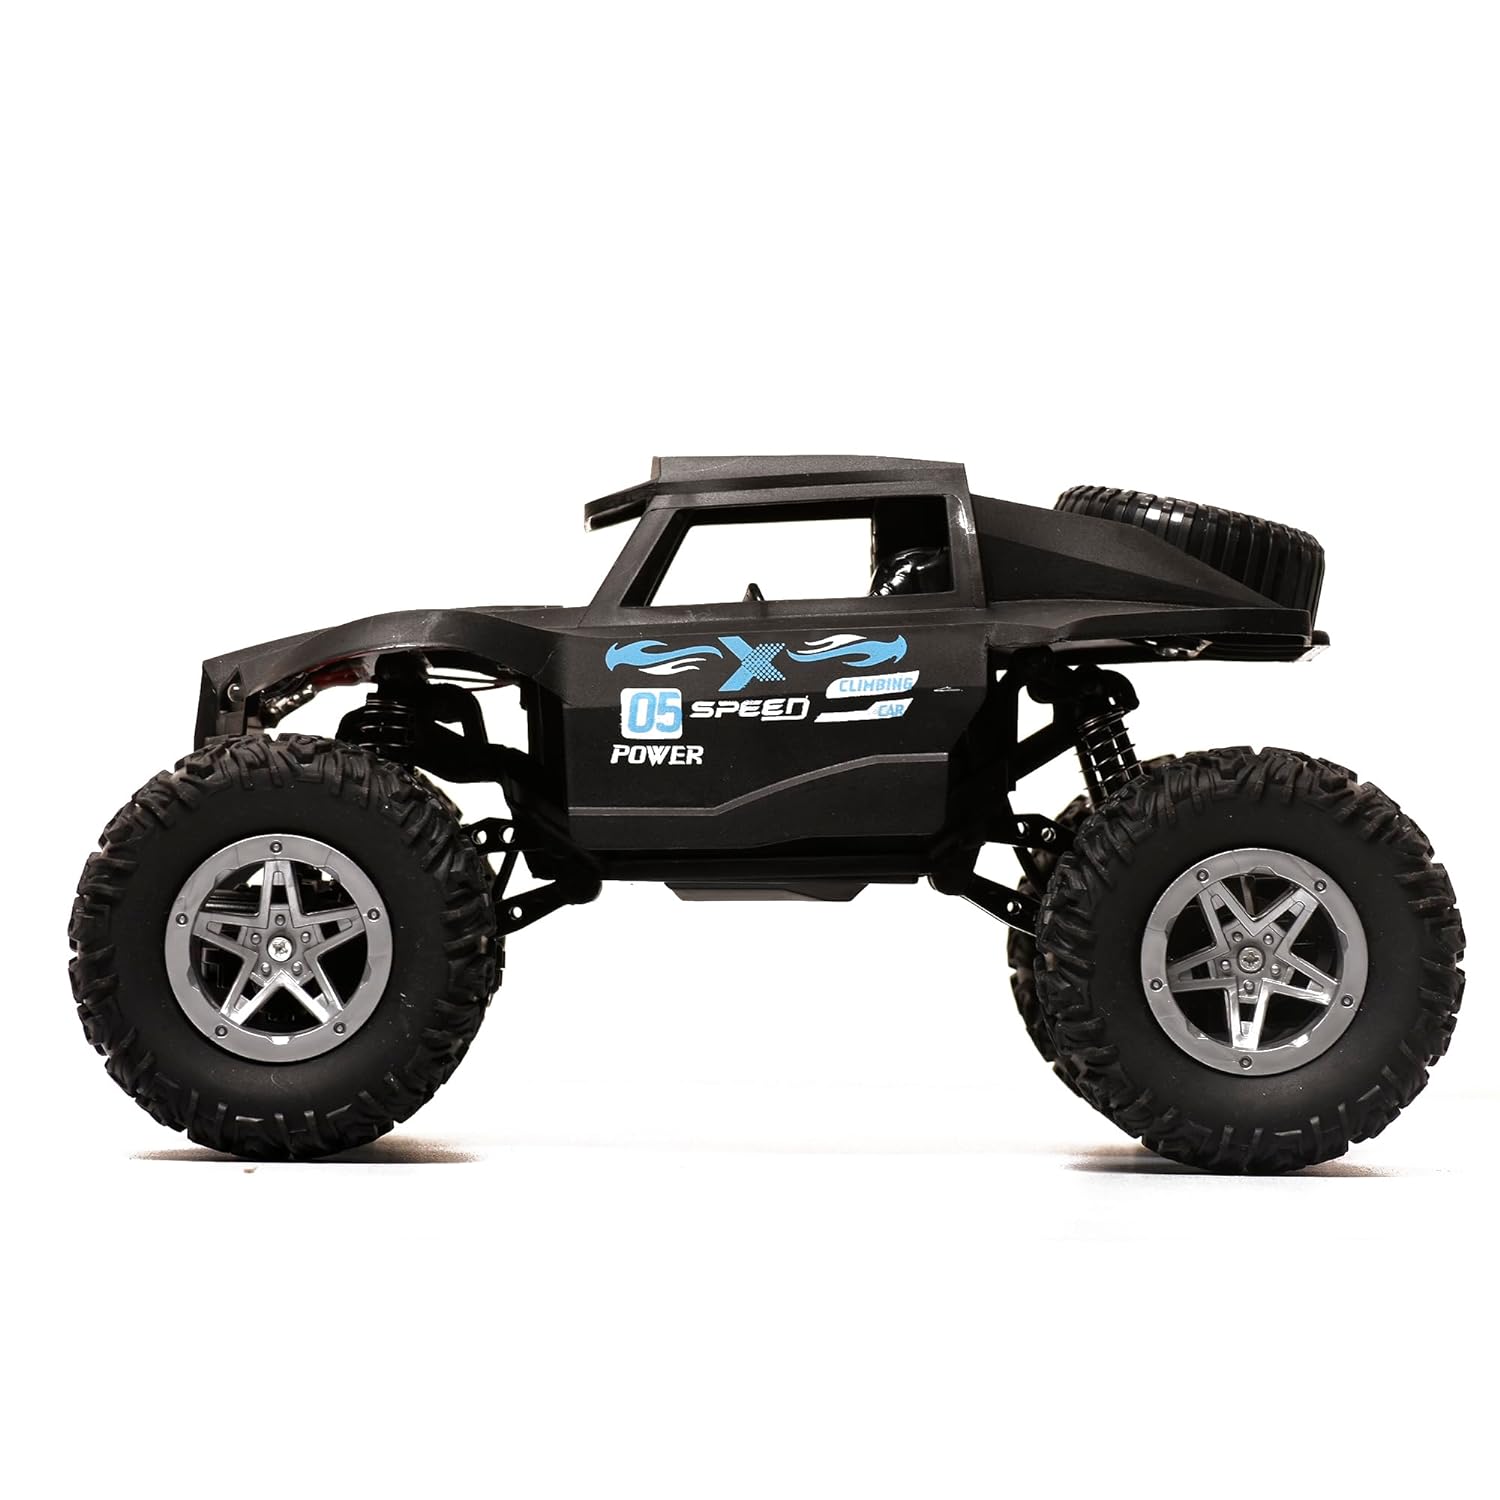 Braintastic Rechargeable 4 Wheel Metal Alloy Phantom Climber Rock Crawler Remote Control RC Car Vehicle Toys for Kids Age 6+ Years